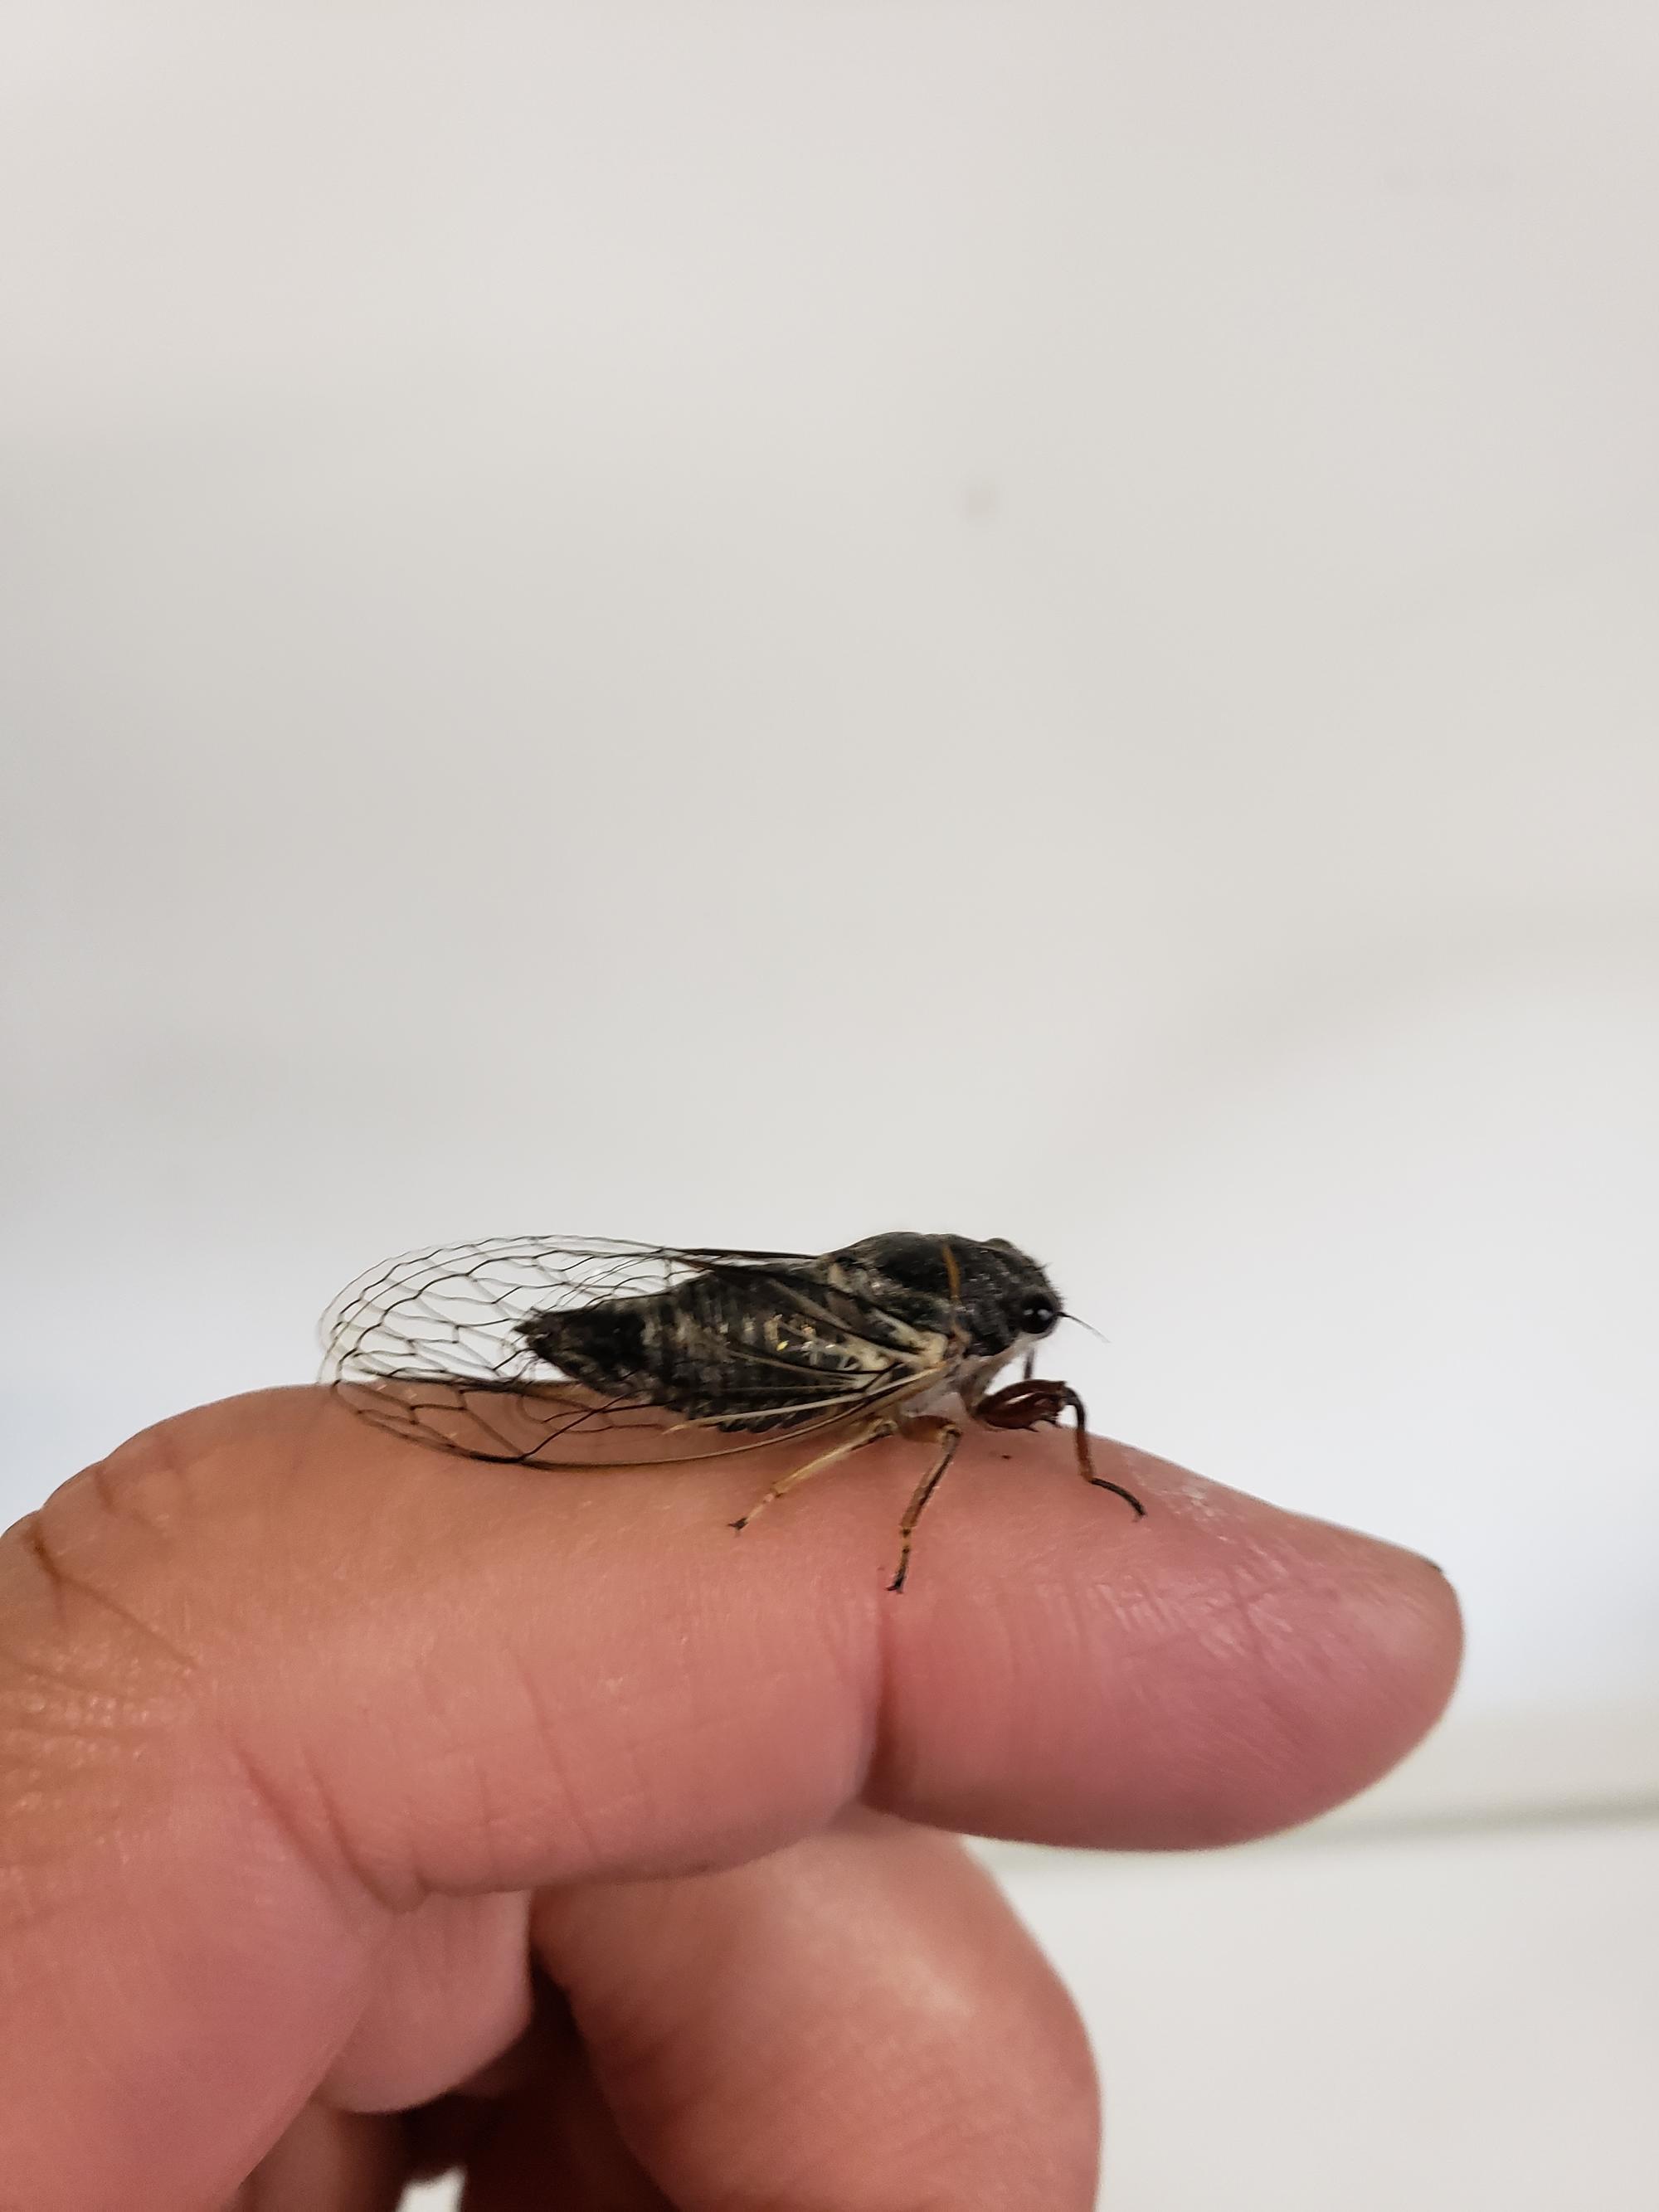 Western US cicada perched on a person's finger